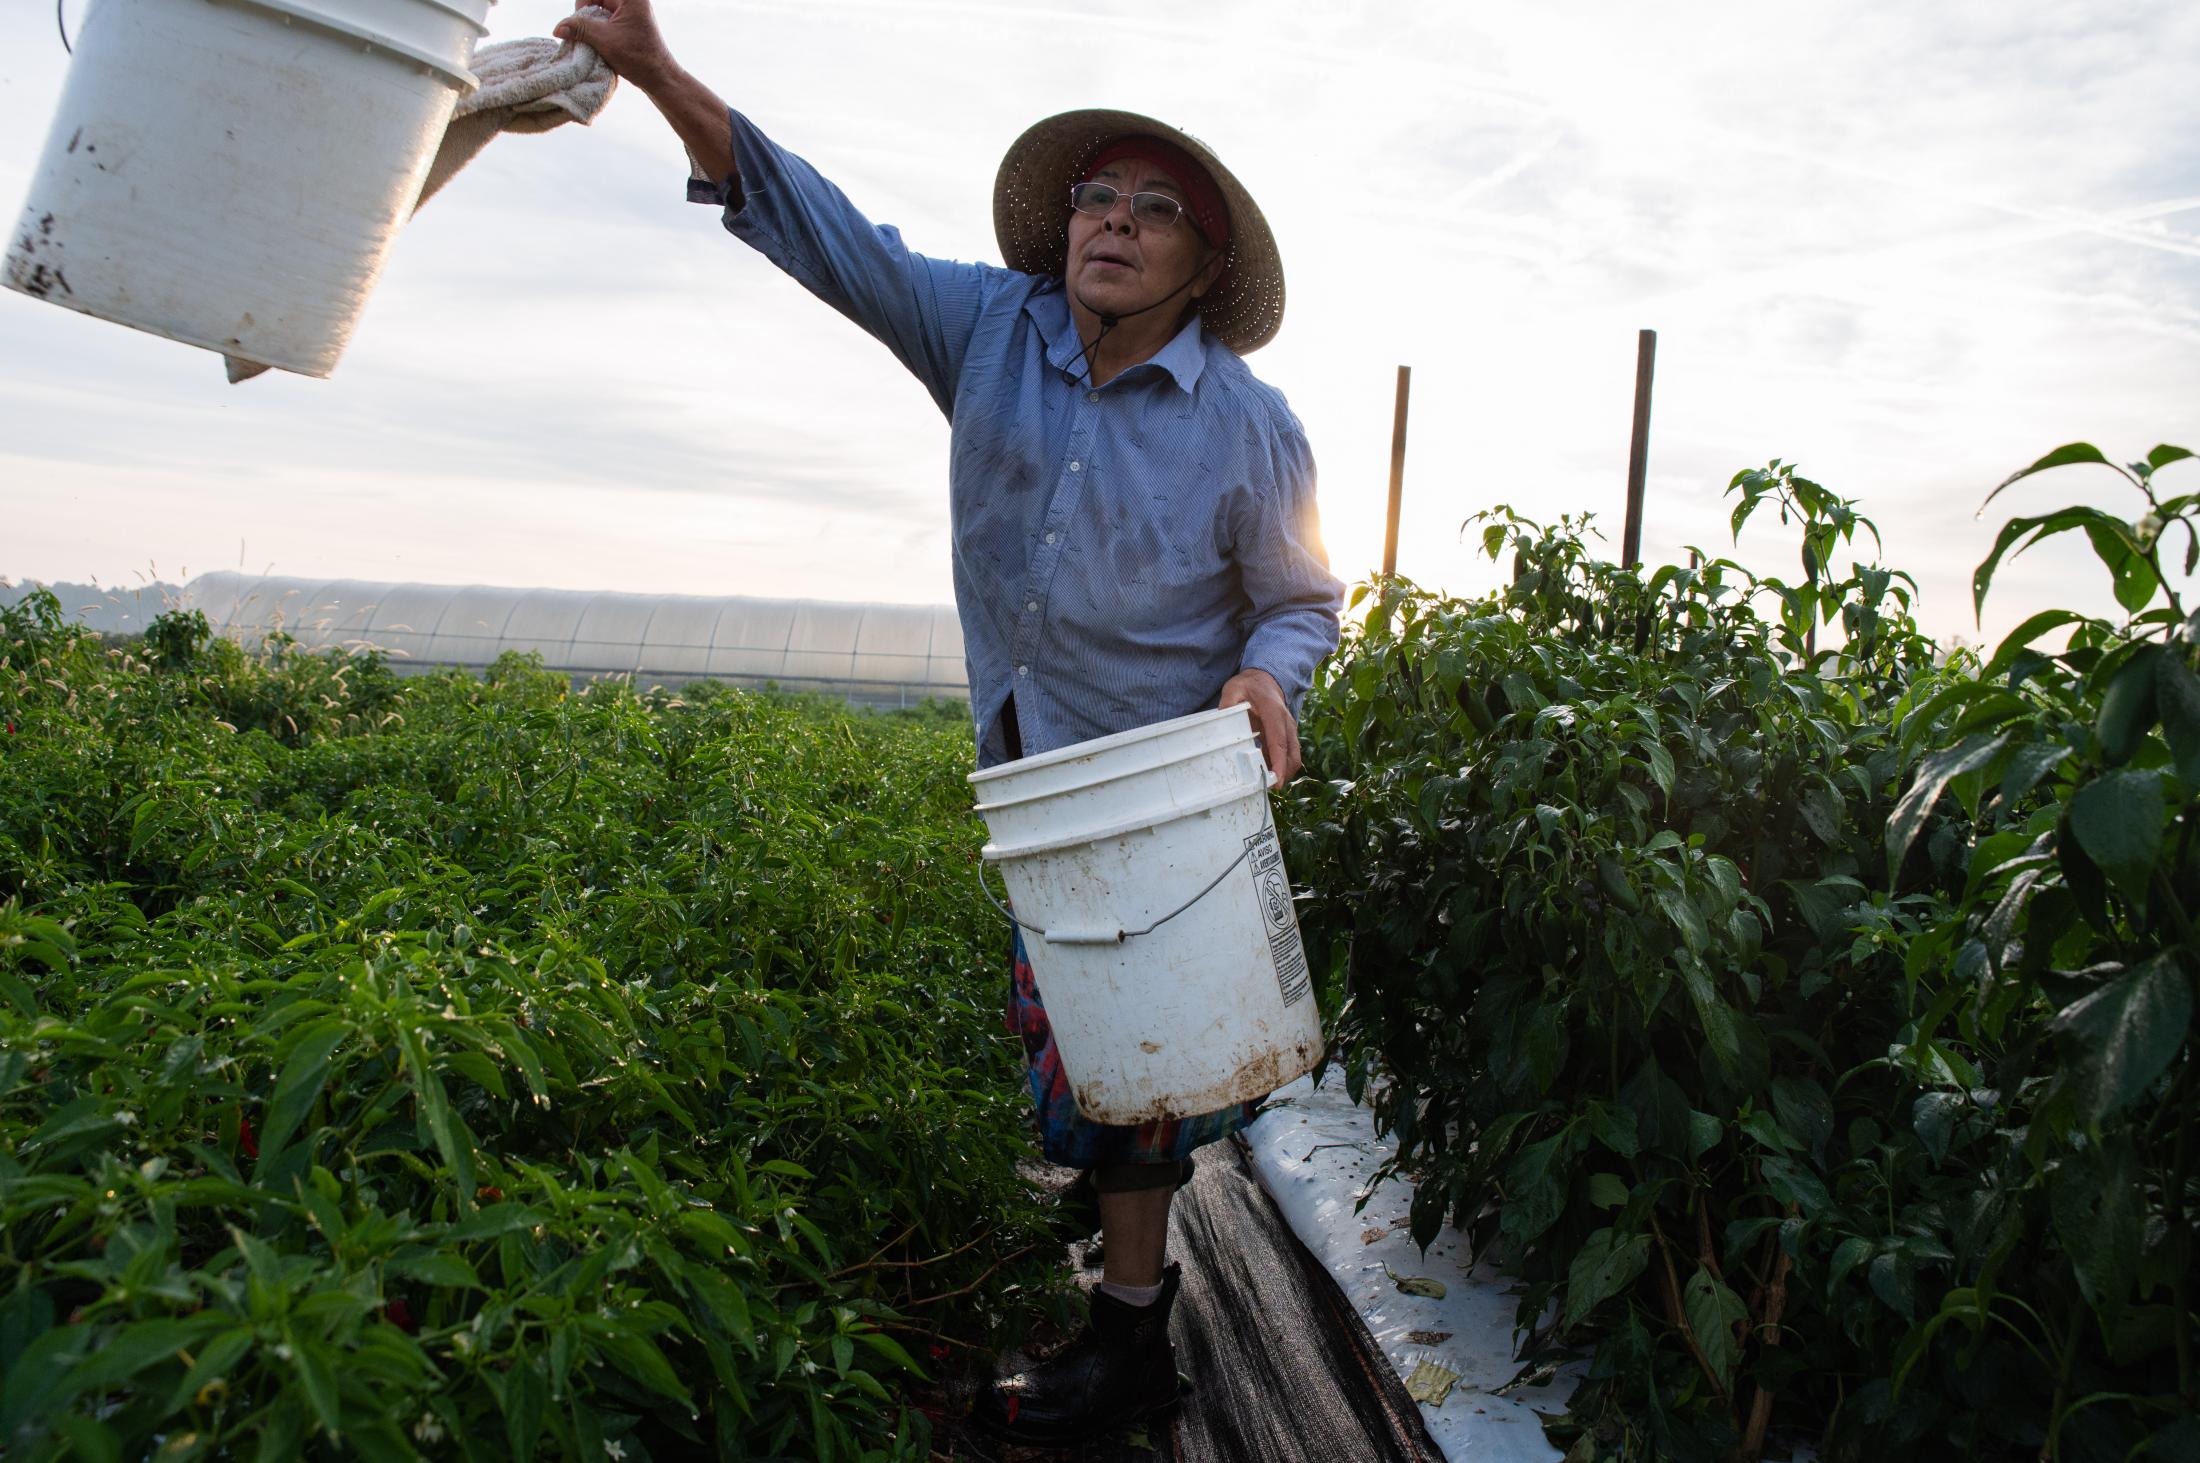  Magdelena, a worker with Rodgers Greens and Roots, tosses a bucket from her working area while picking peppers. She arrived before sunrise this Thursday morning to prepare. Magdelena is one of the many diverse members of this farm working diligently with an open heart. &nbsp; 